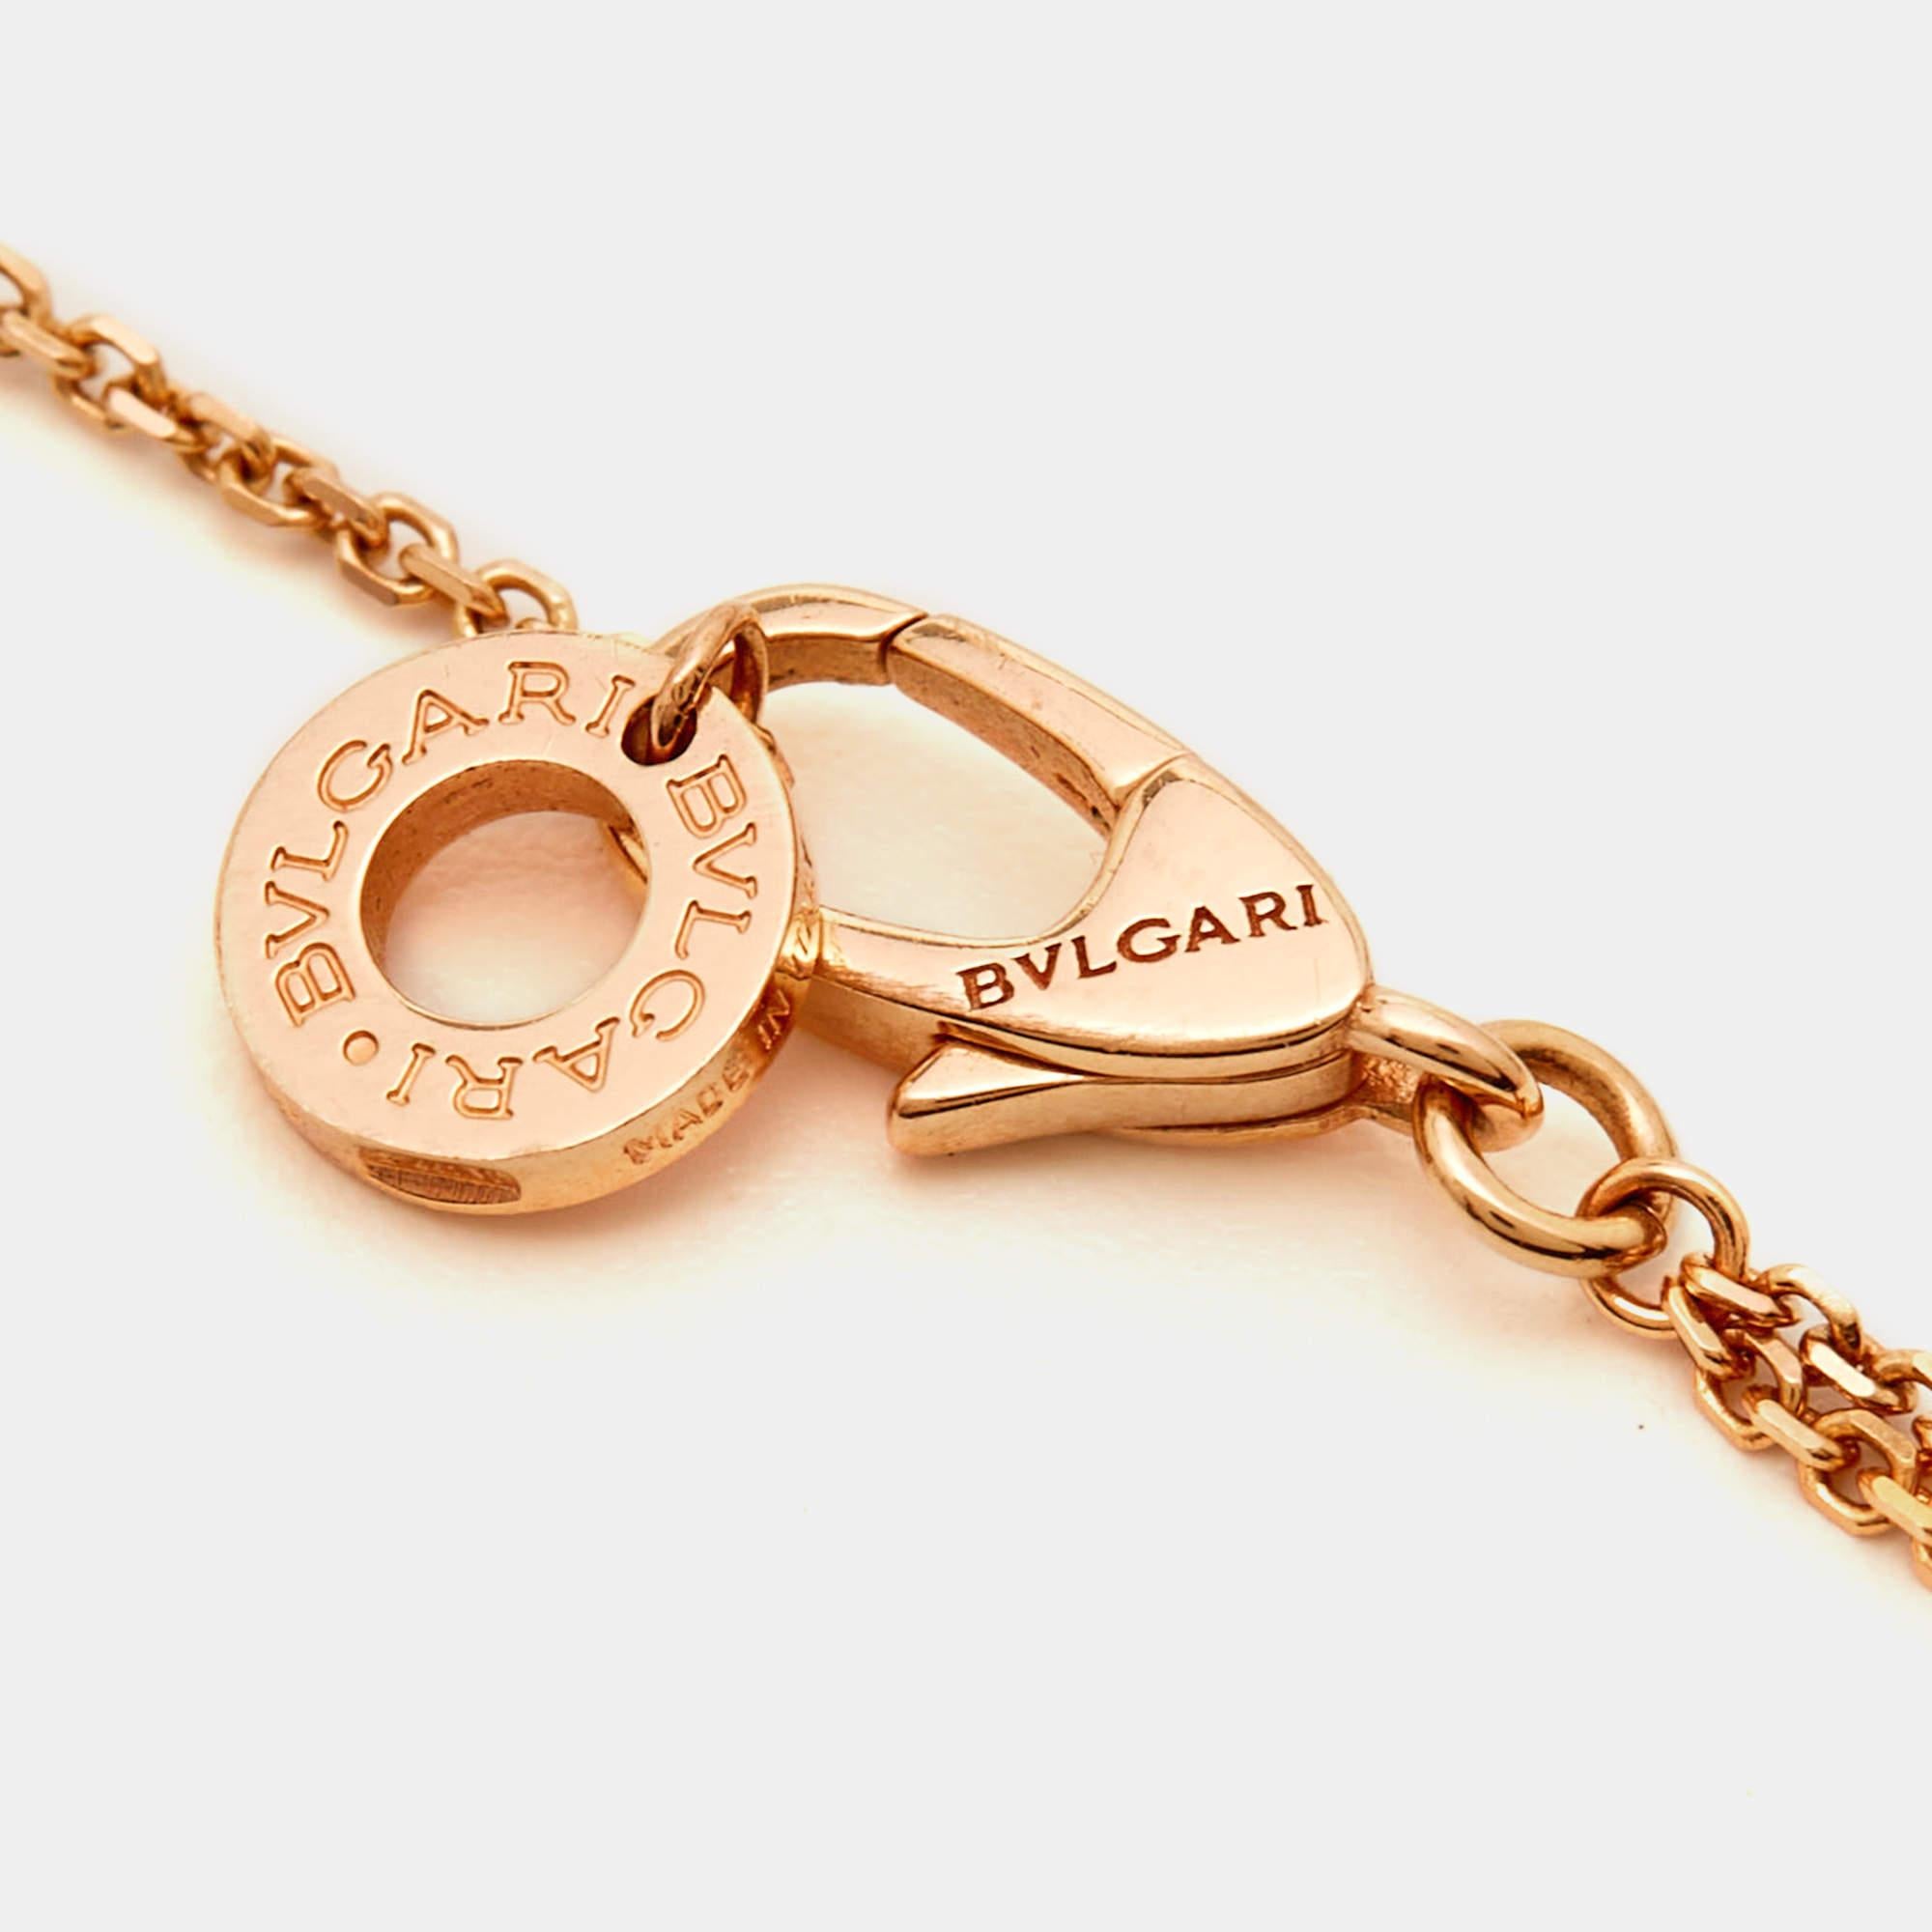 The grandeur of Italian beauty is reflected in this bracelet from Bvlgari's Divas' Dream collection. The line is inspired by the fan-shaped mosaics of the Caracalla Baths in Rome, a detail the brand has interpreted with mastery. The bracelet has